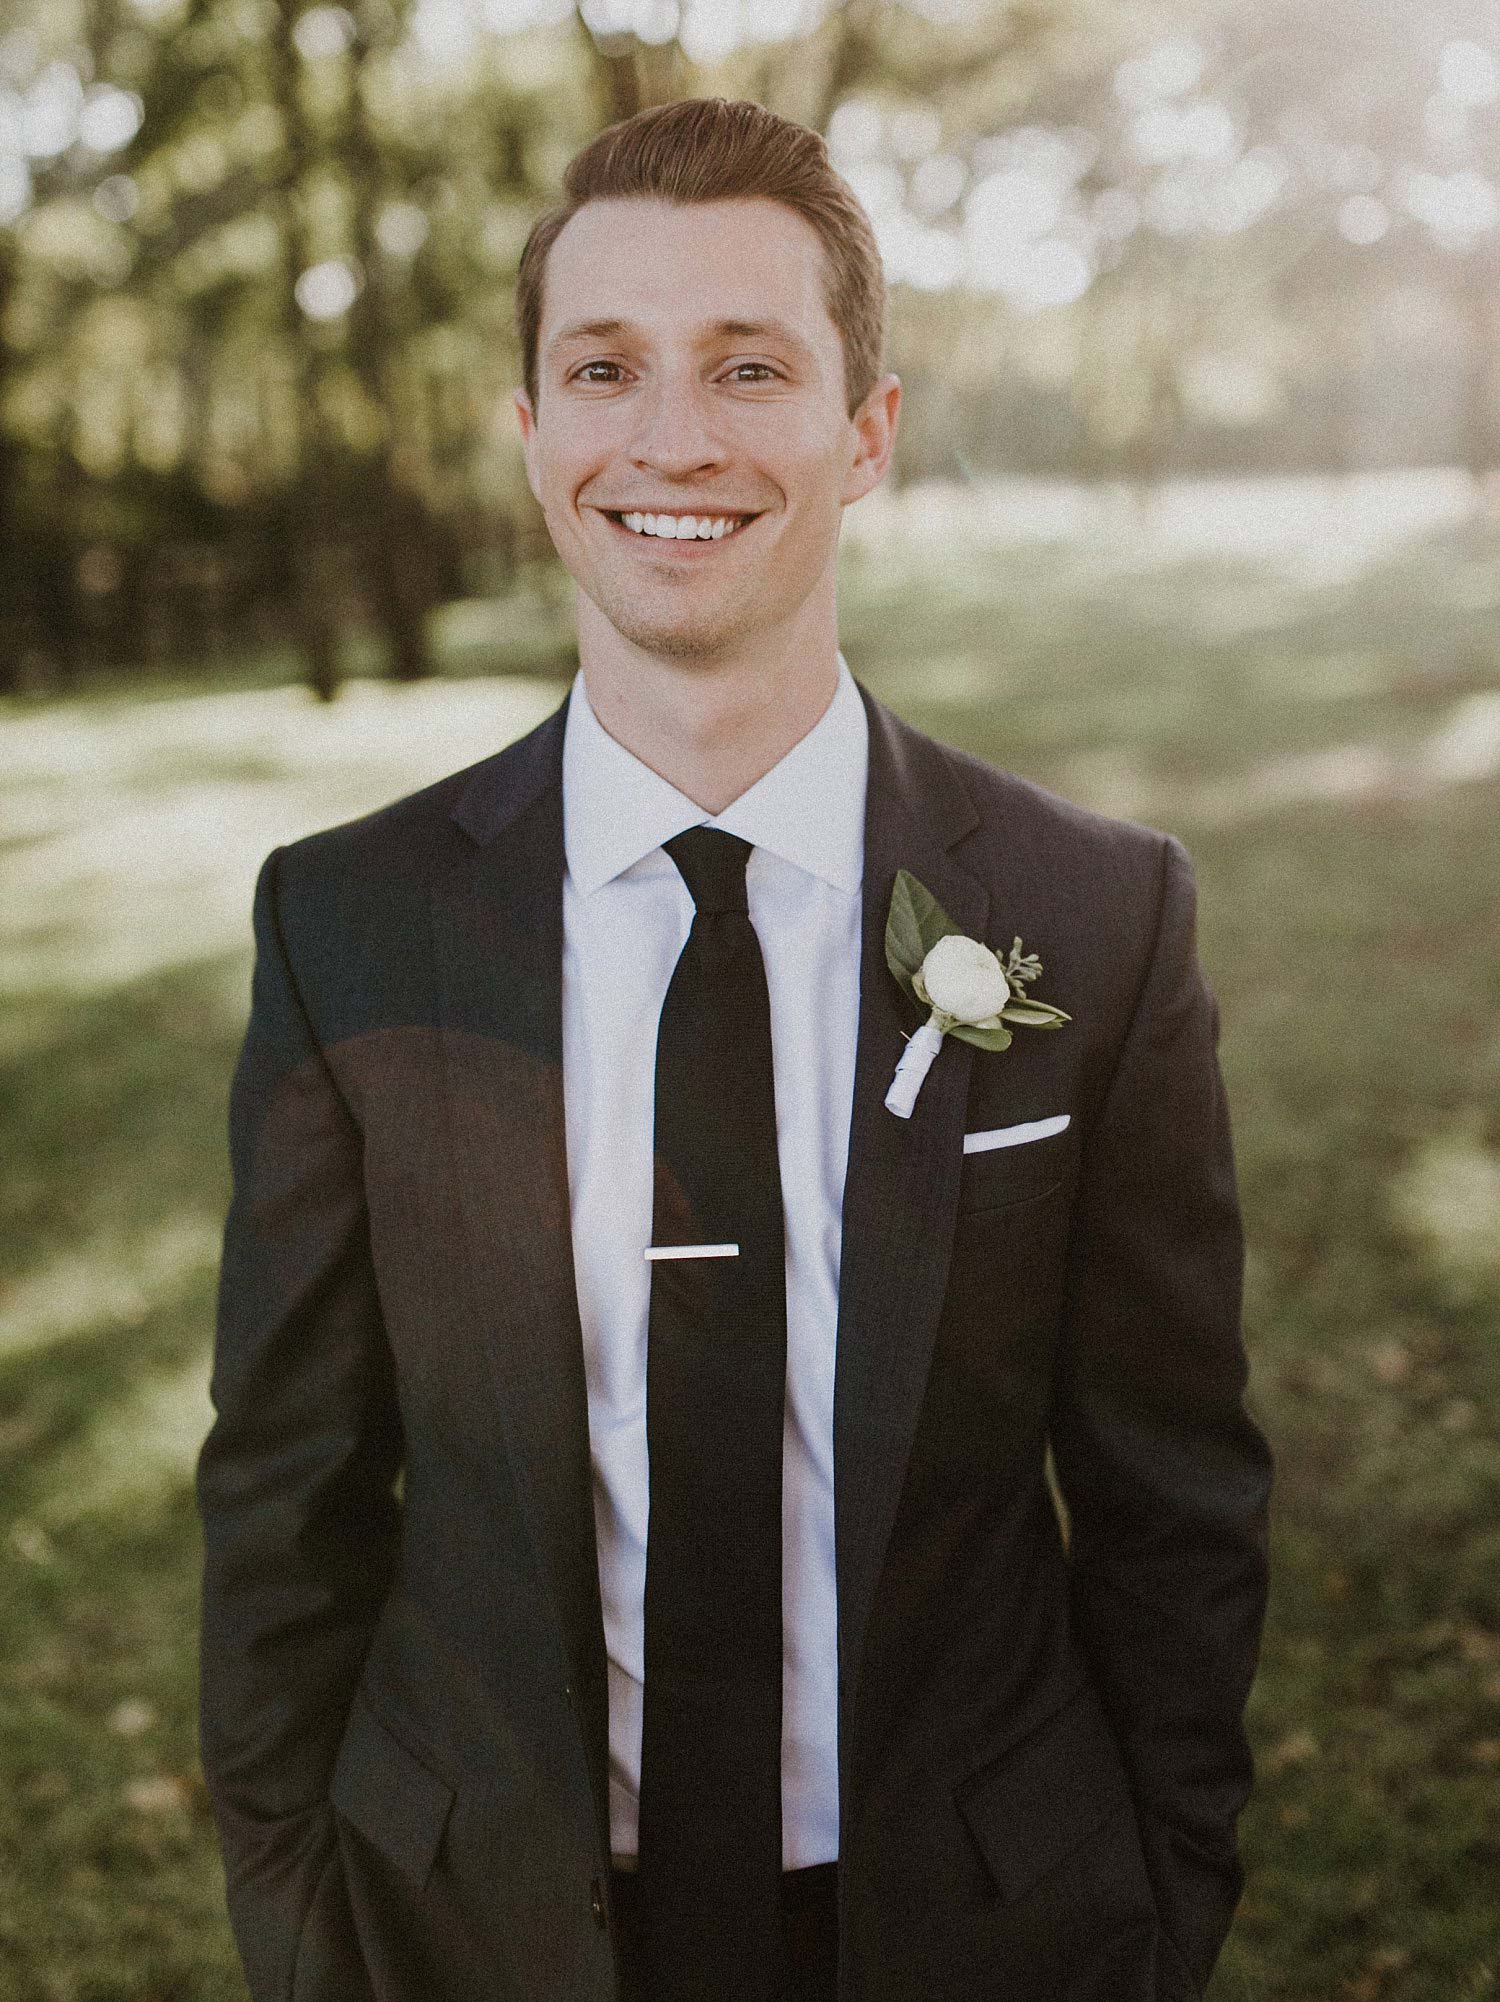 We love this classic groom's attire for this barn wedding.  He wore a dark grey suite, black tie, and white boutonniere